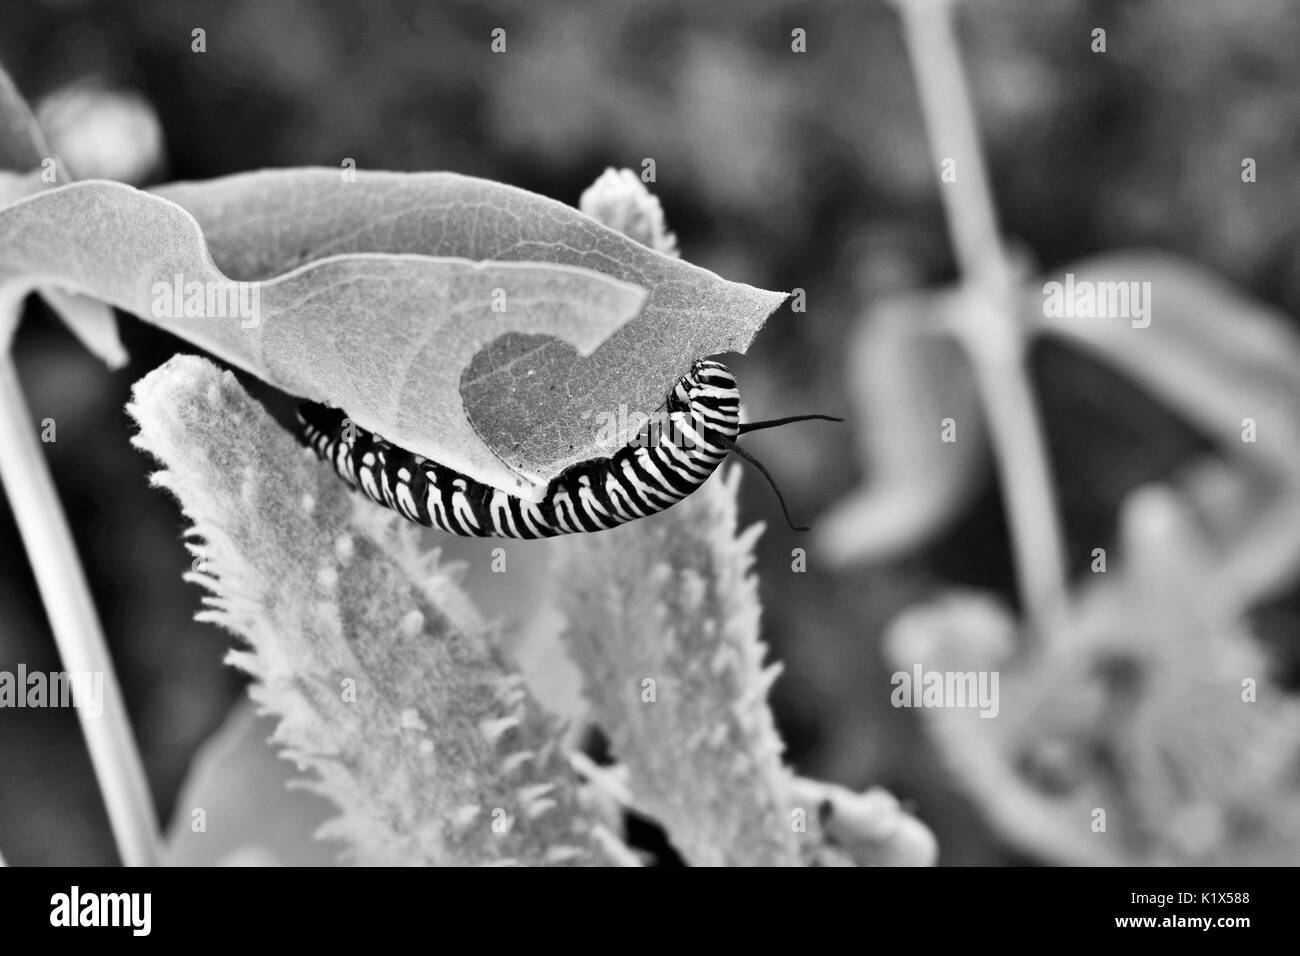 Close Up of Monarch Caterpillar Eating Milkweed in black and white Stock Photo